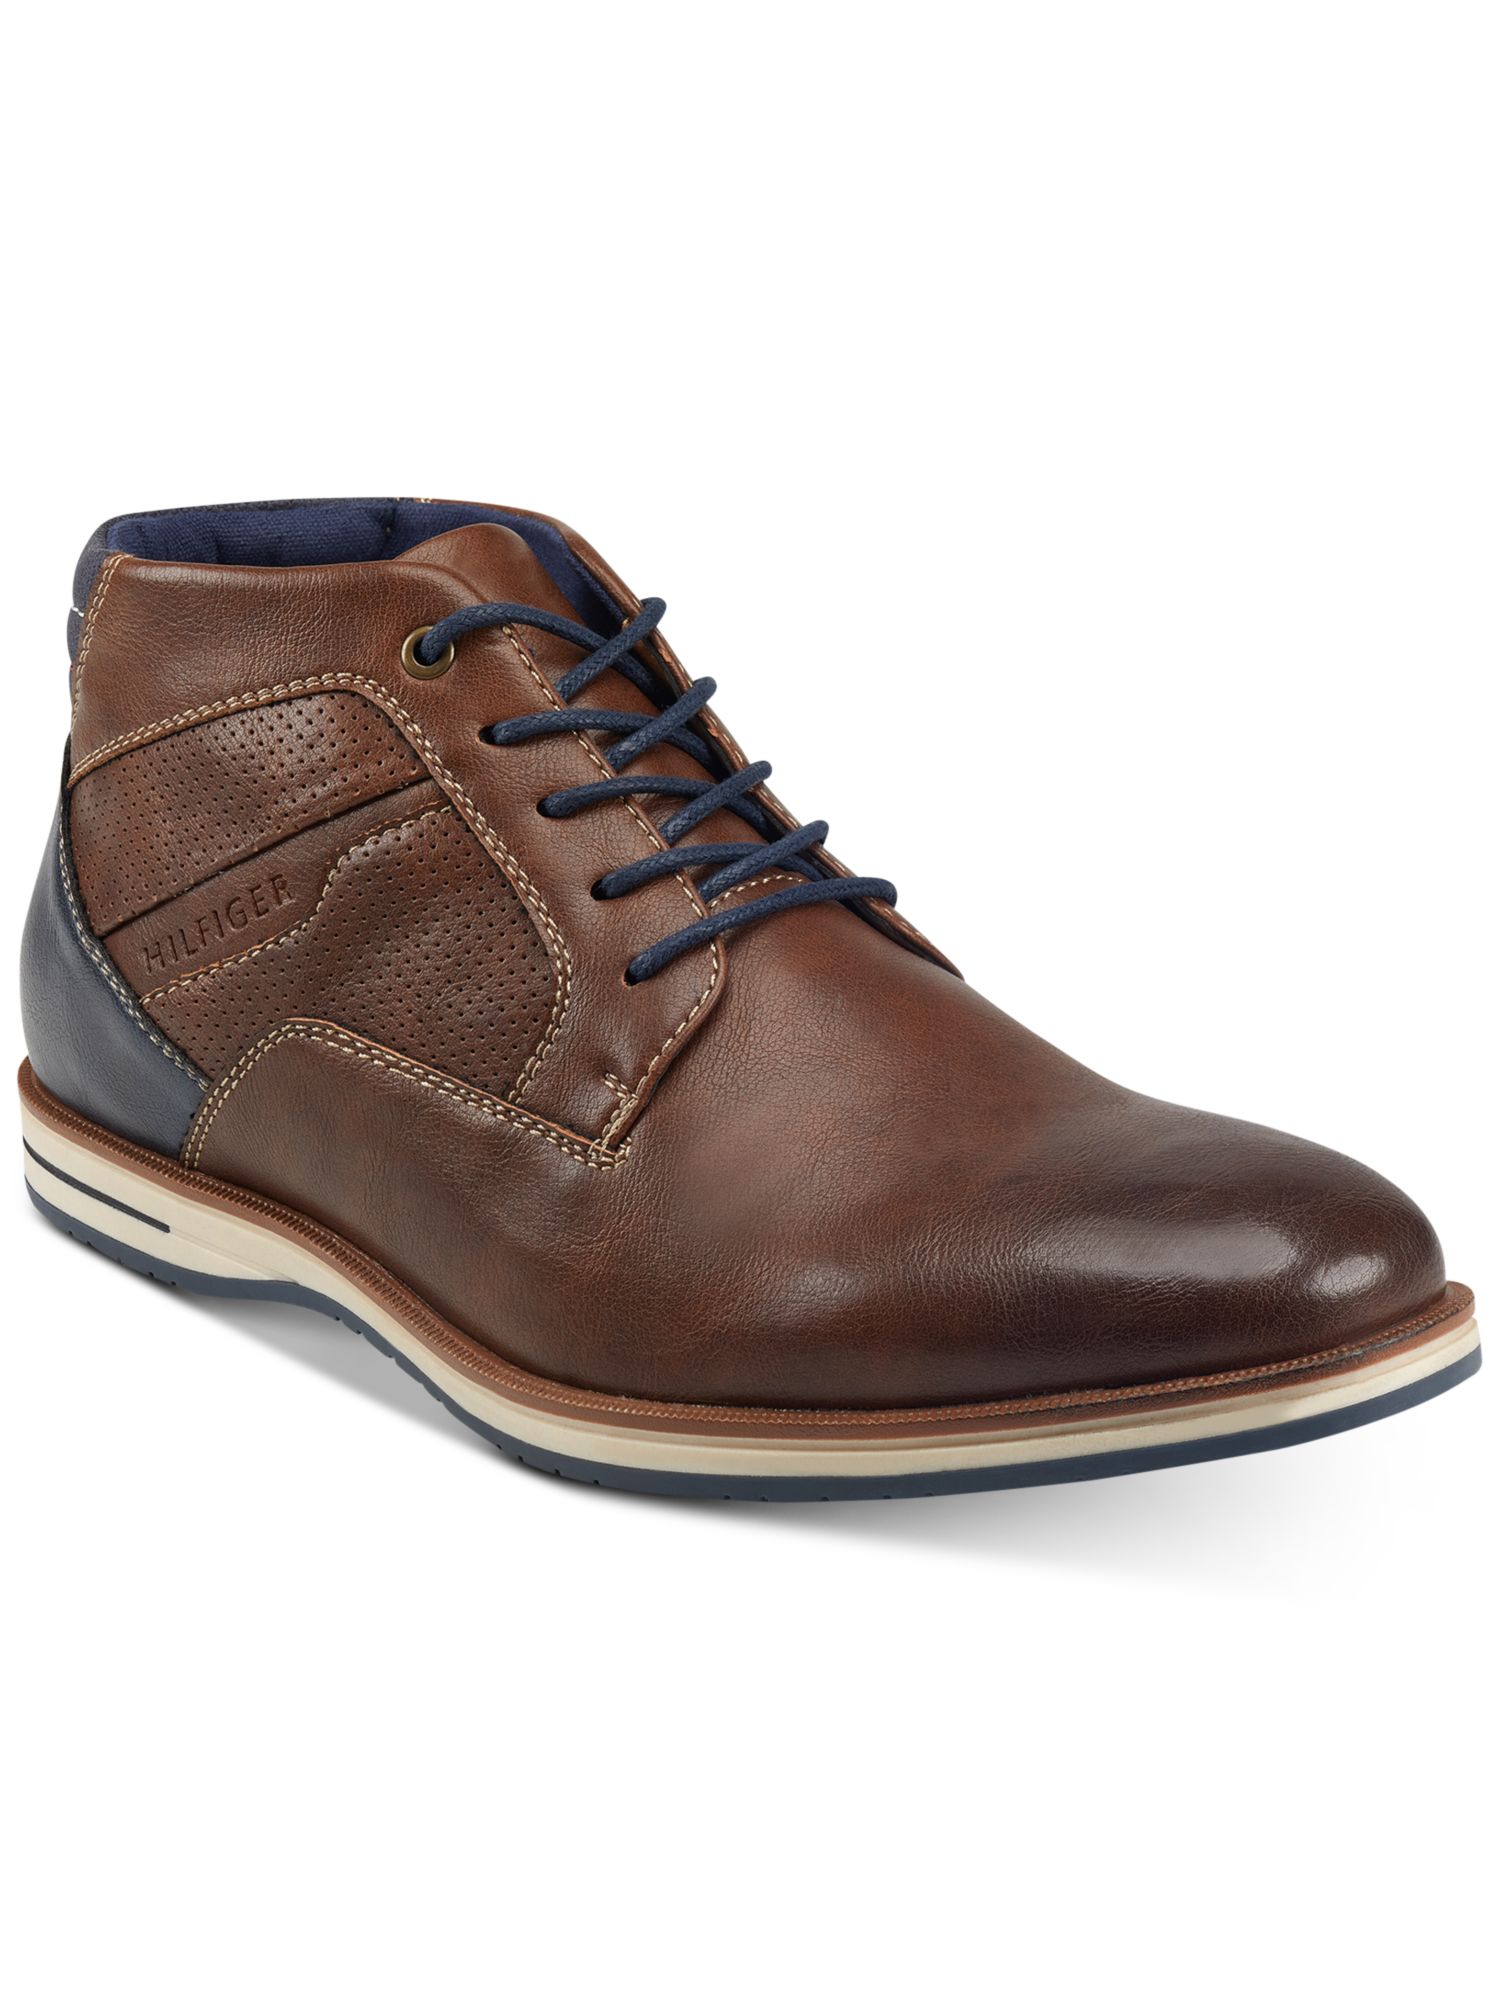 TOMMY HILFIGER Mens Brown Cushioned Comfort Ulan Round Toe Platform Lace-Up Chukka Boots 11.5 M - image 1 of 4